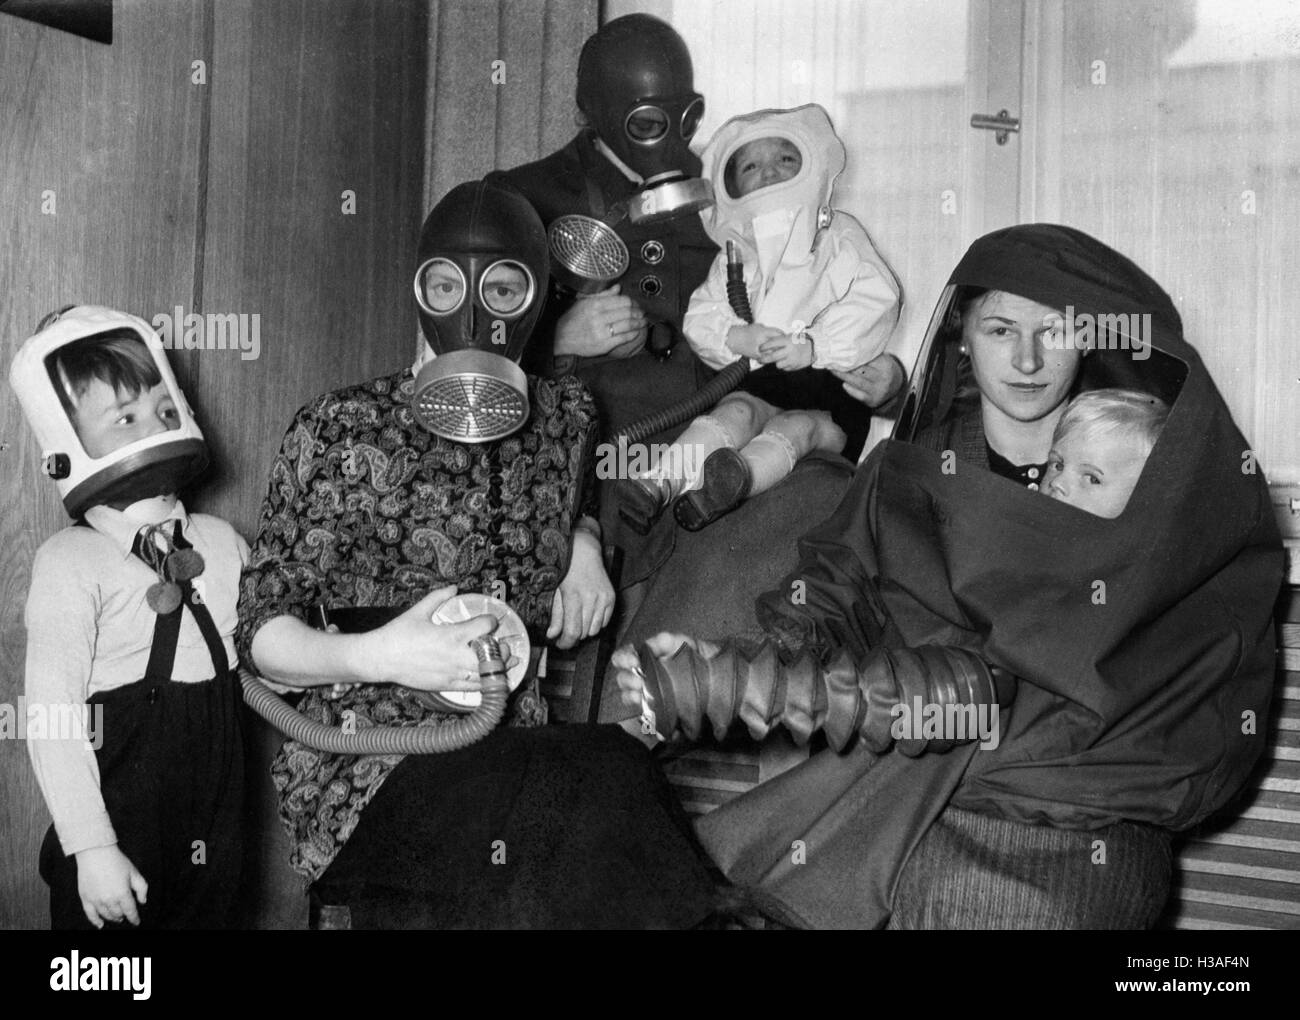 Family in air-raid protection gear, undated Stock Photo